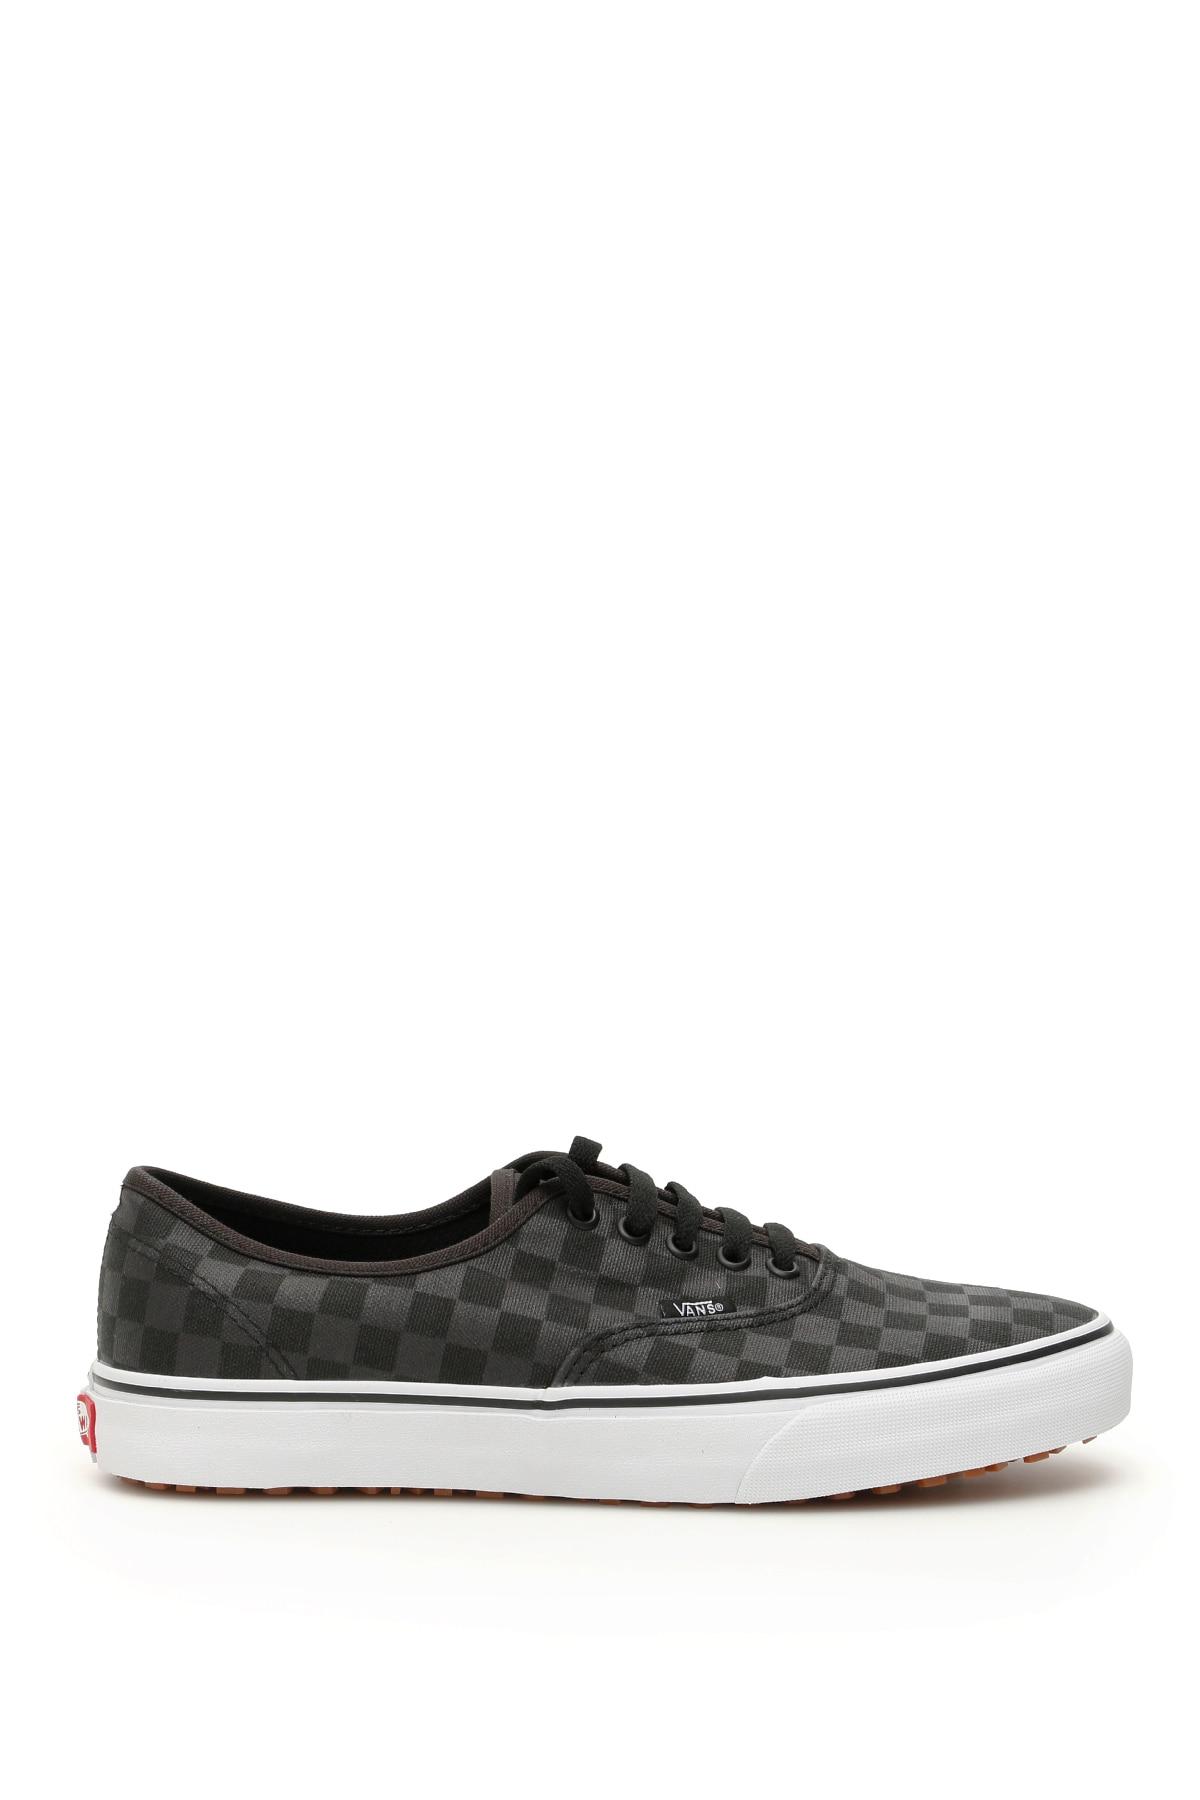 Vans Unisex Made For The Makers 2.0 Authentic Uc Sneakers in Black | Lyst